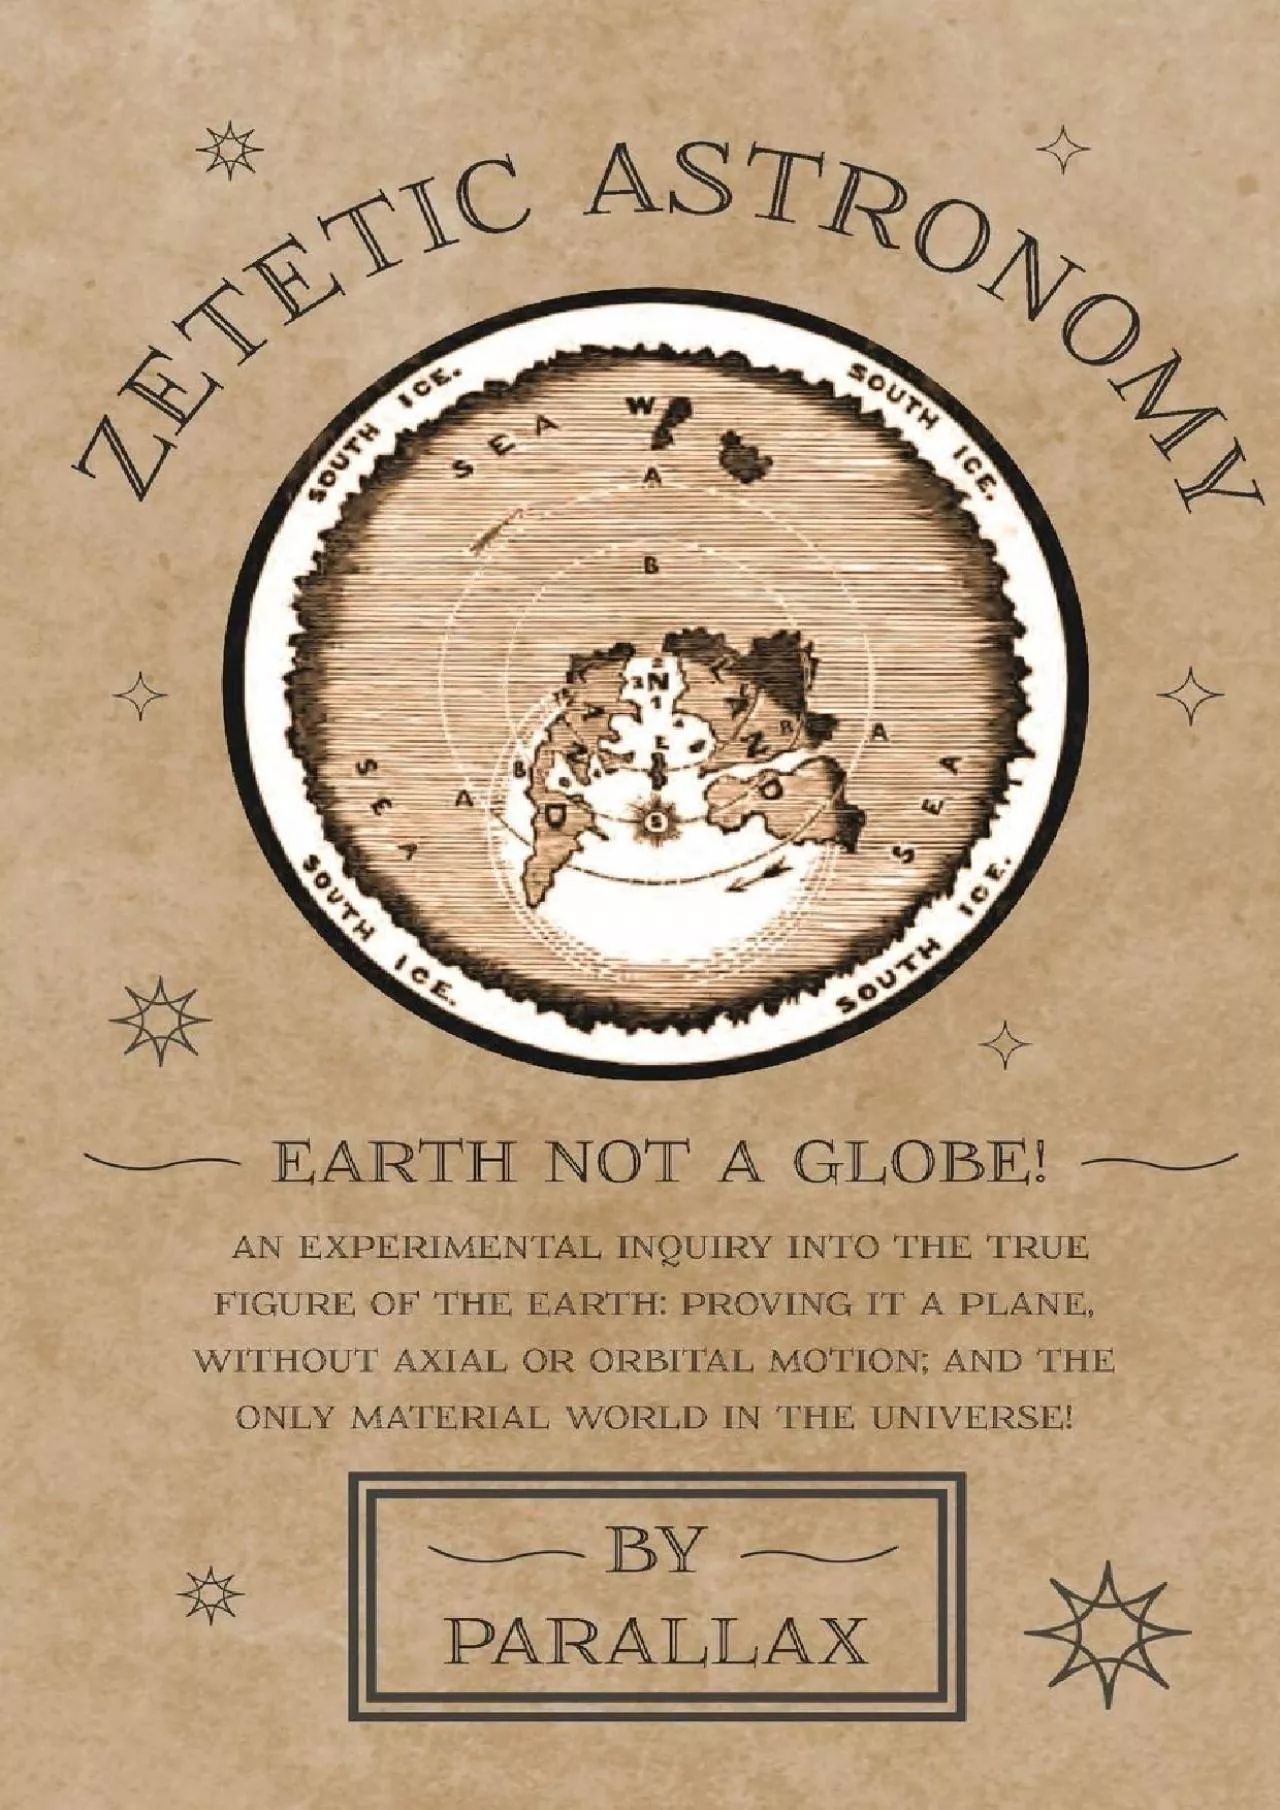 (BOOS)-Zetetic Astronomy - Earth Not a Globe! An Experimental Inquiry into the True Figure